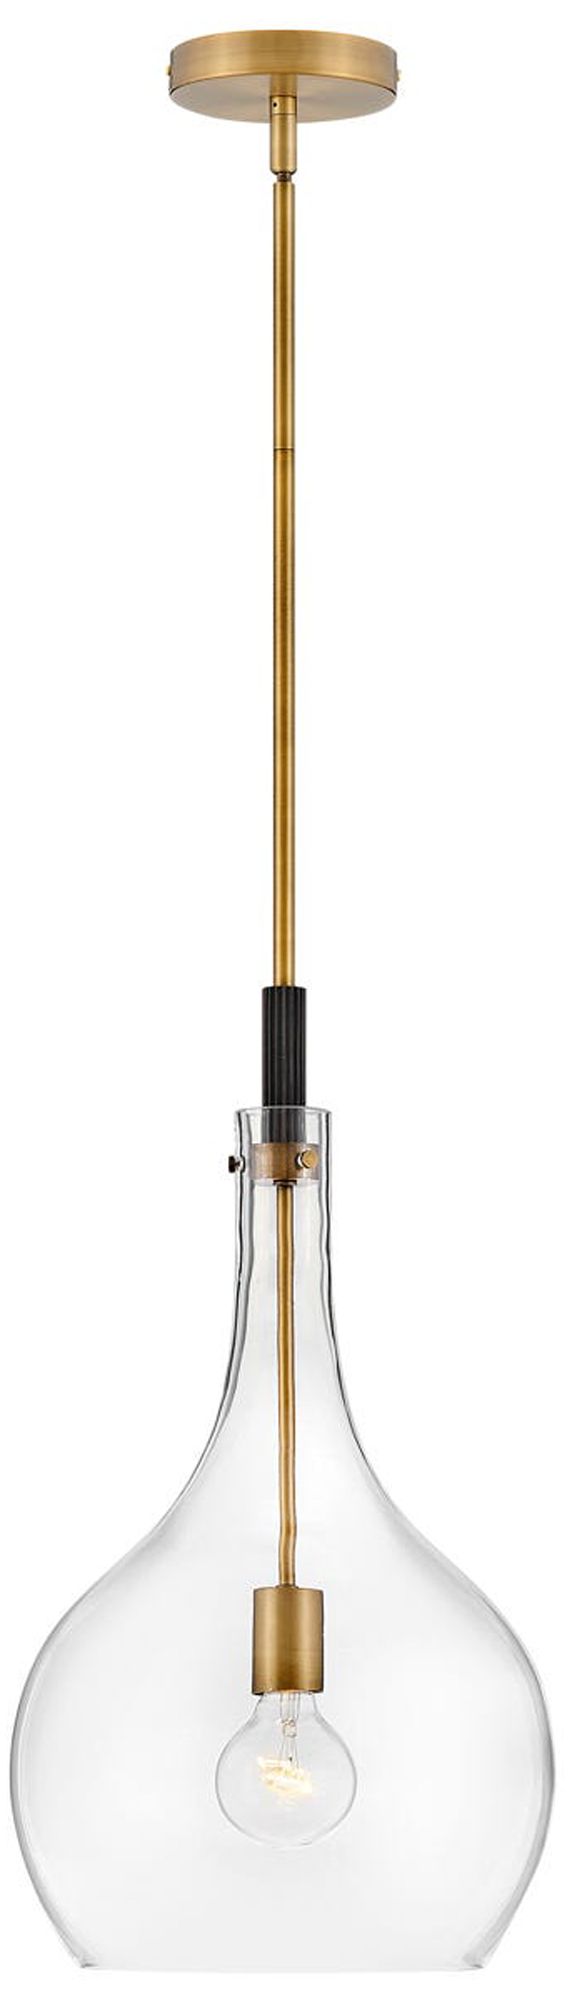 Ziggy 12" Wide Brass and Clear Glass Mini Pendant by Hinkley Lighting